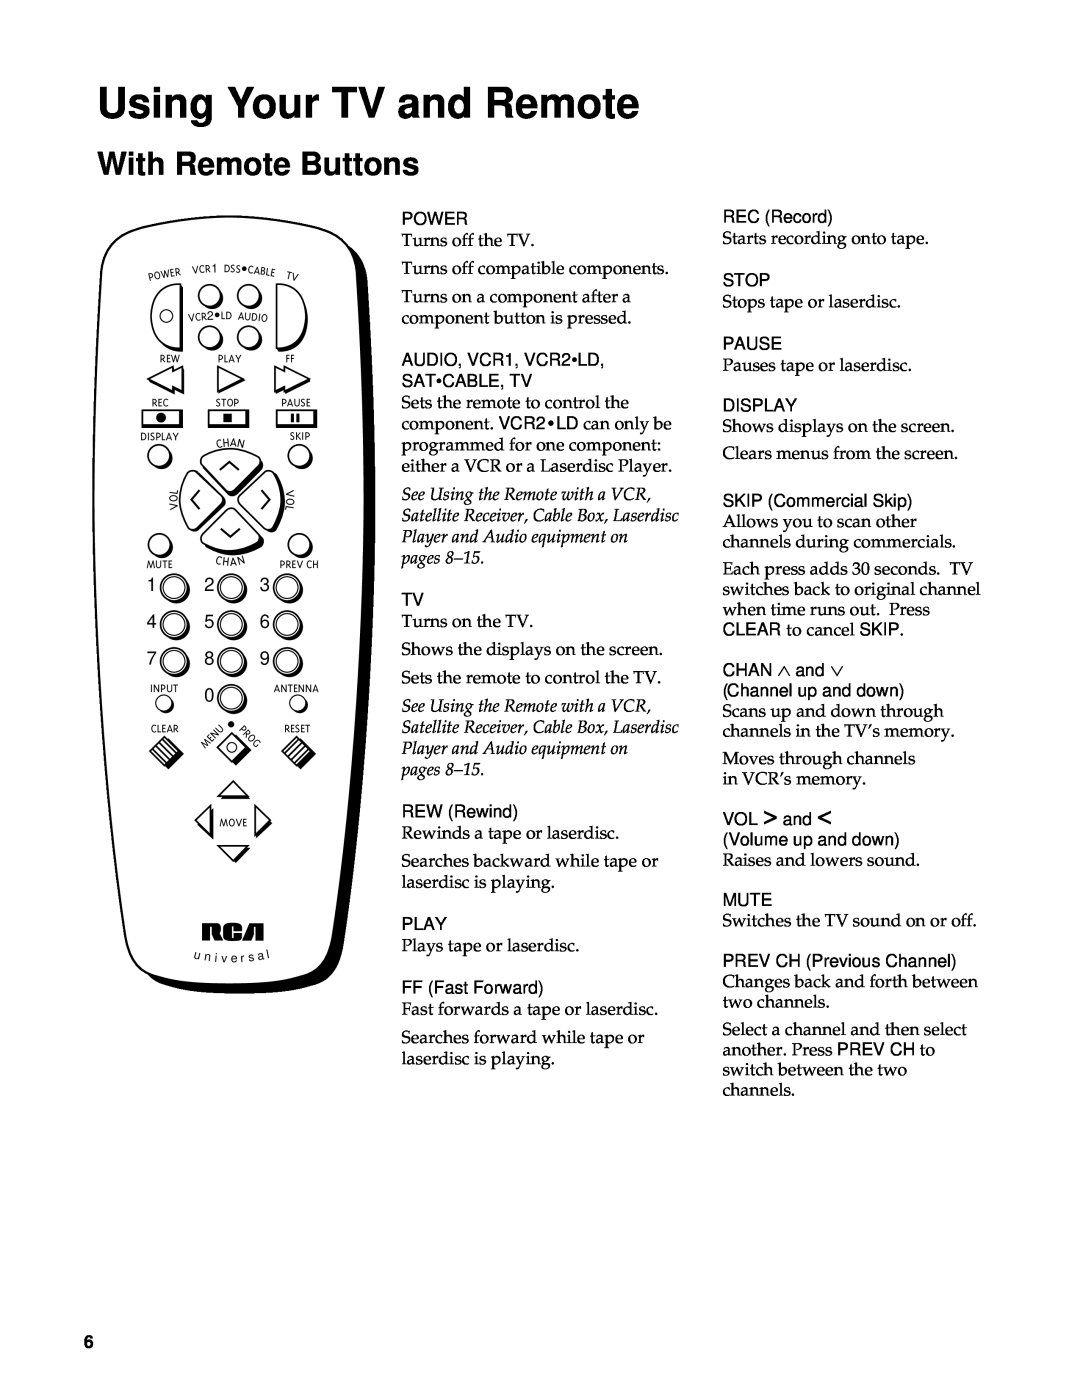 RCA Color TV manual Using Your TV and Remote, With Remote Buttons, 1 2 4 5 7 8 